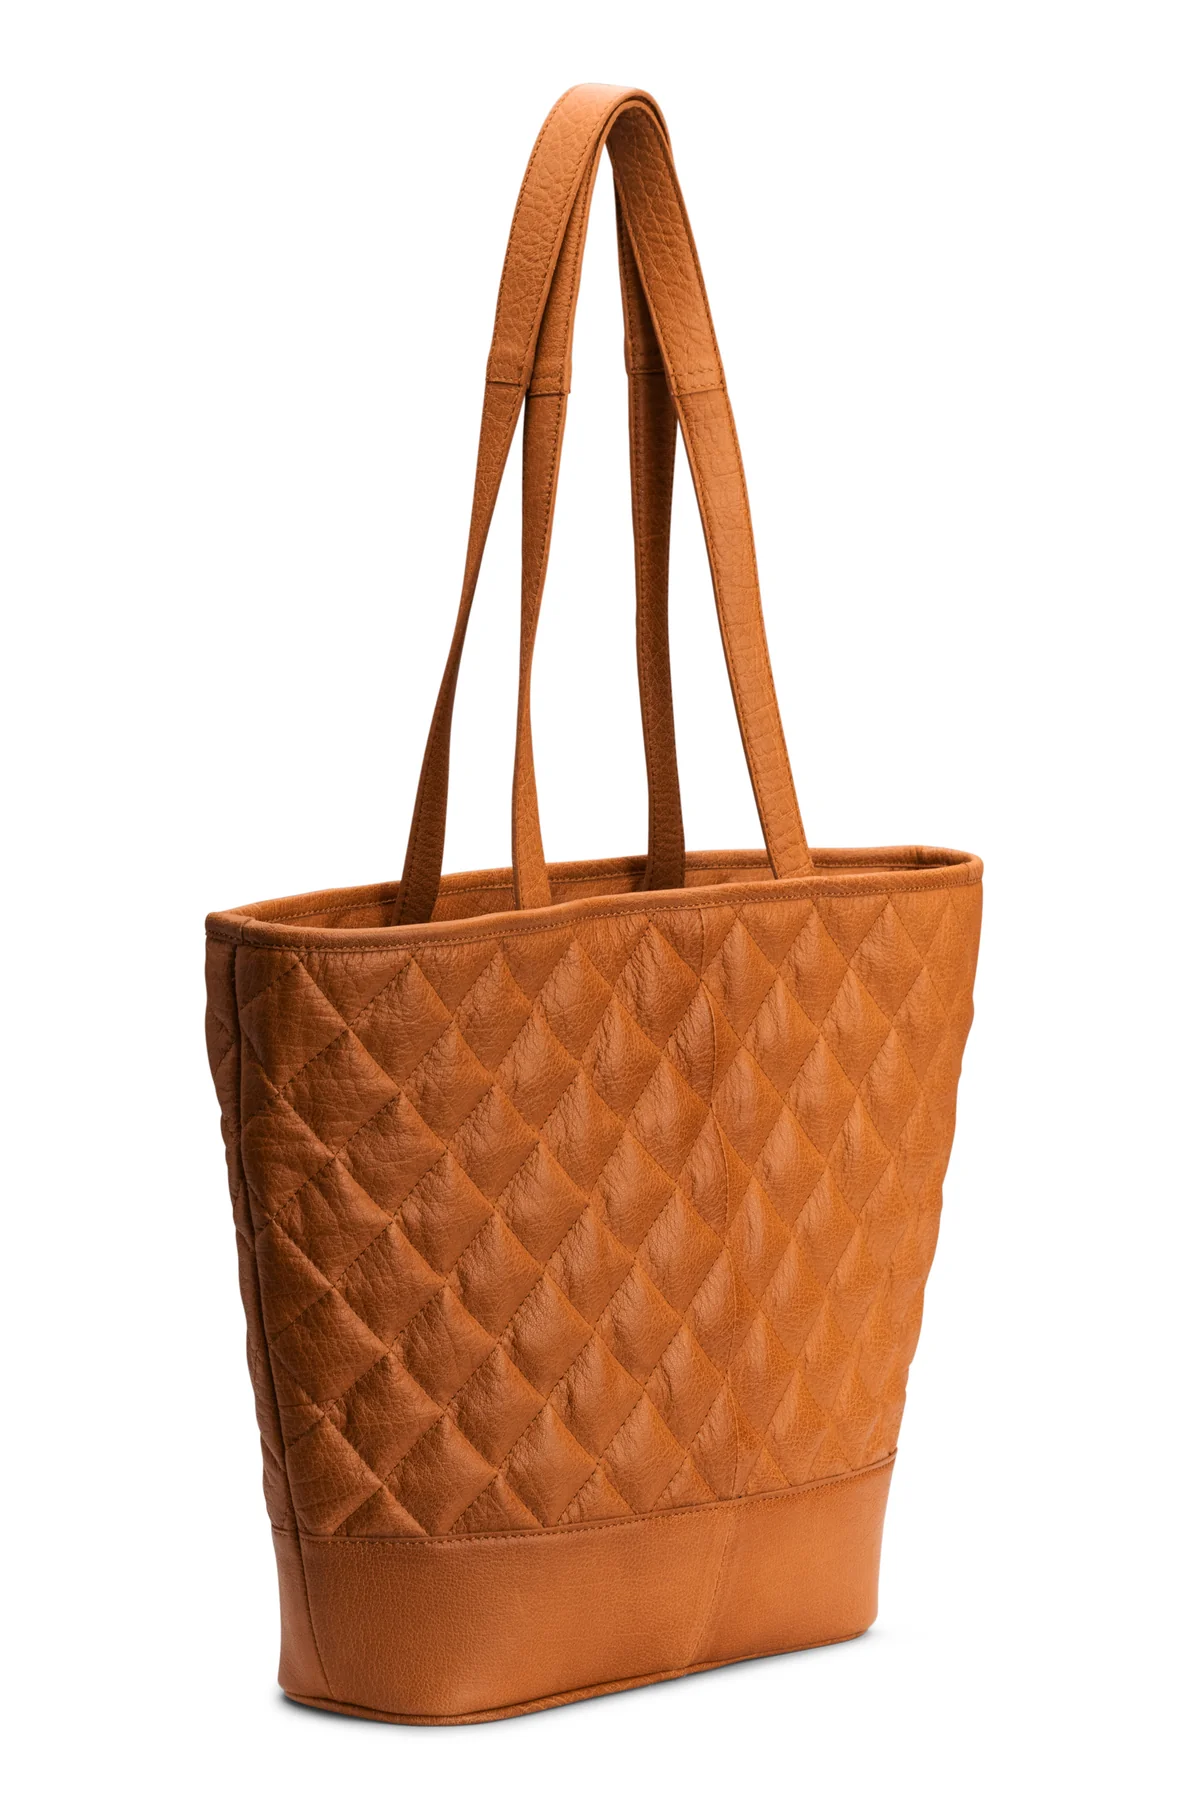 Muud_Betsy_Shopper_whisky_upside_with_straps